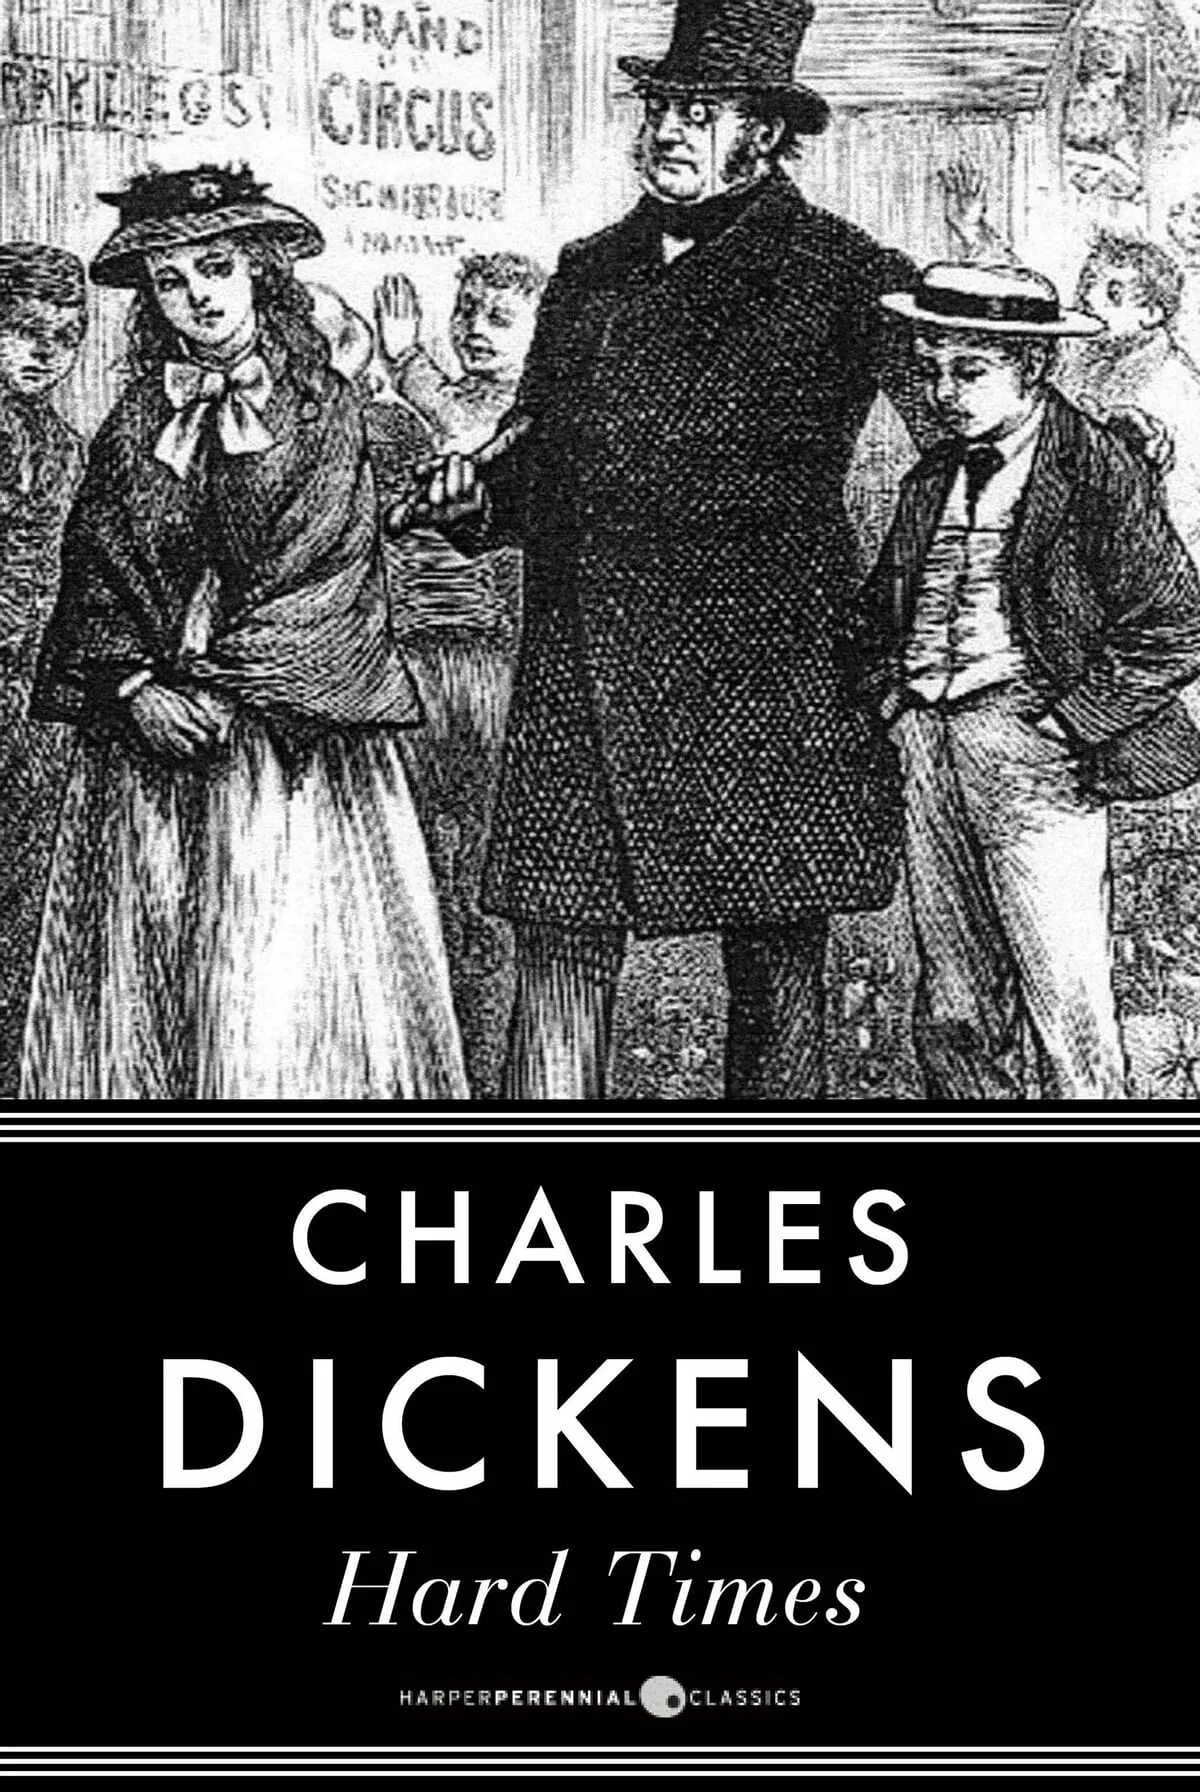 Hard times. Dickens Charles.